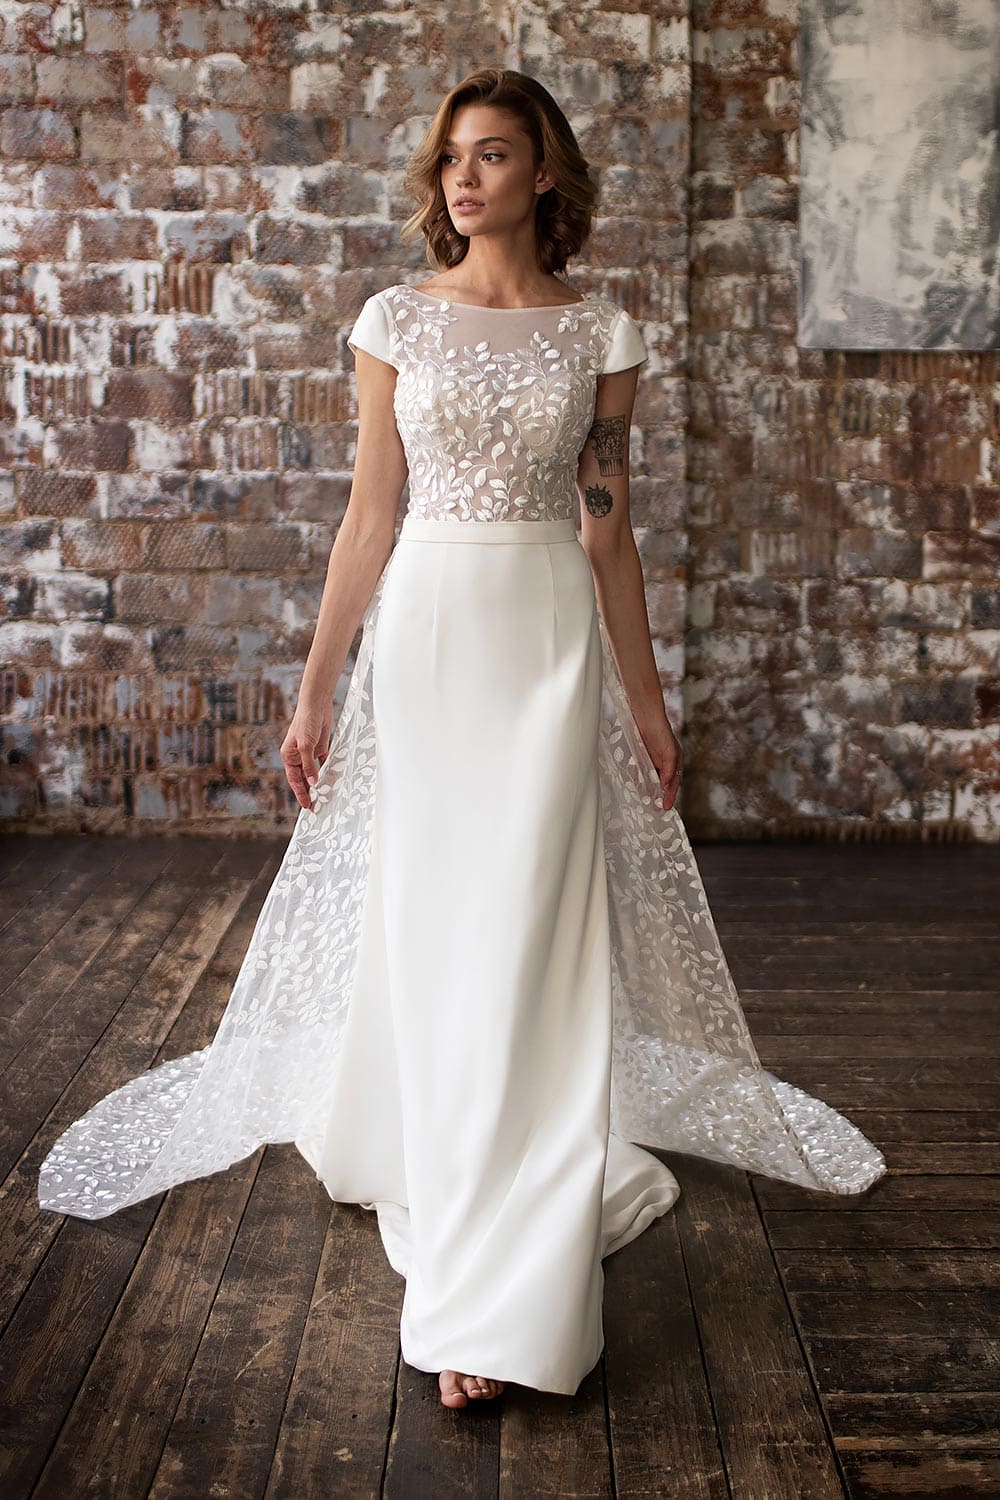 Vintage Lace Wedding Dress With Sleeves | Love Spell Design